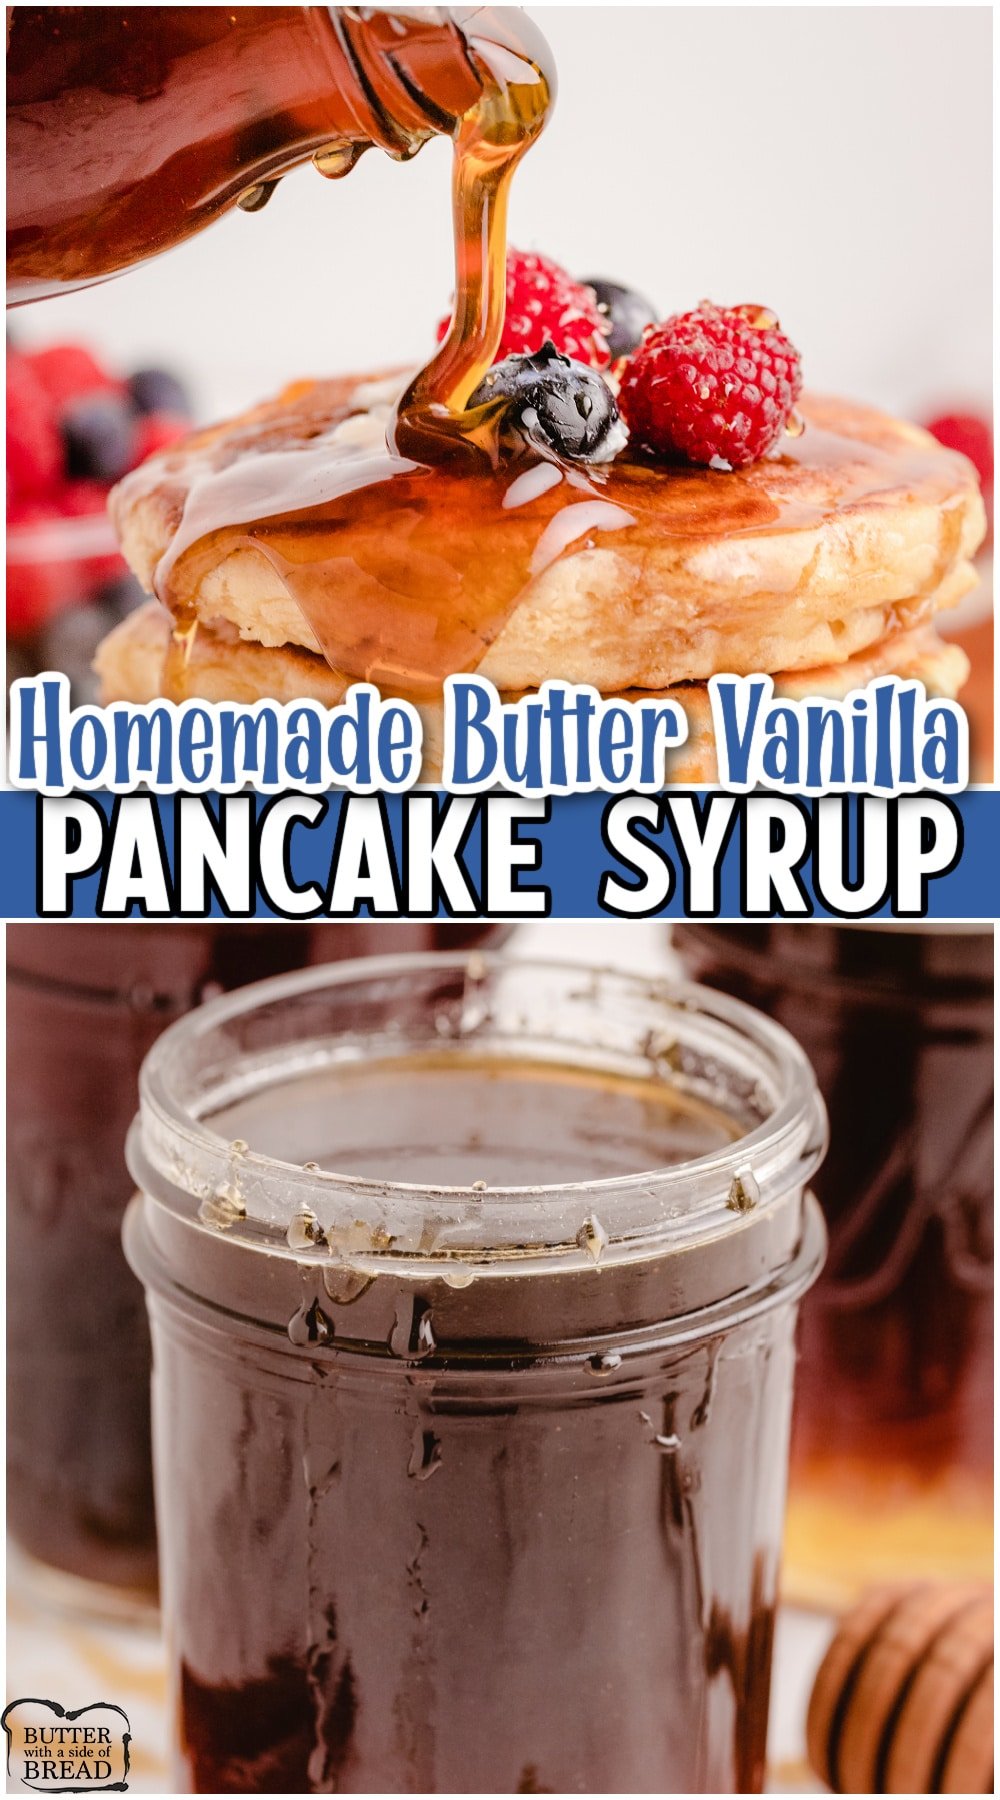 Our Vanilla Butter Pancake Syrup Recipe is SO much BETTER than store-bought! Fantastic warm buttery maple pancake syrup make with brown sugar, honey, butter and extracts. Simple recipe everyone adores!